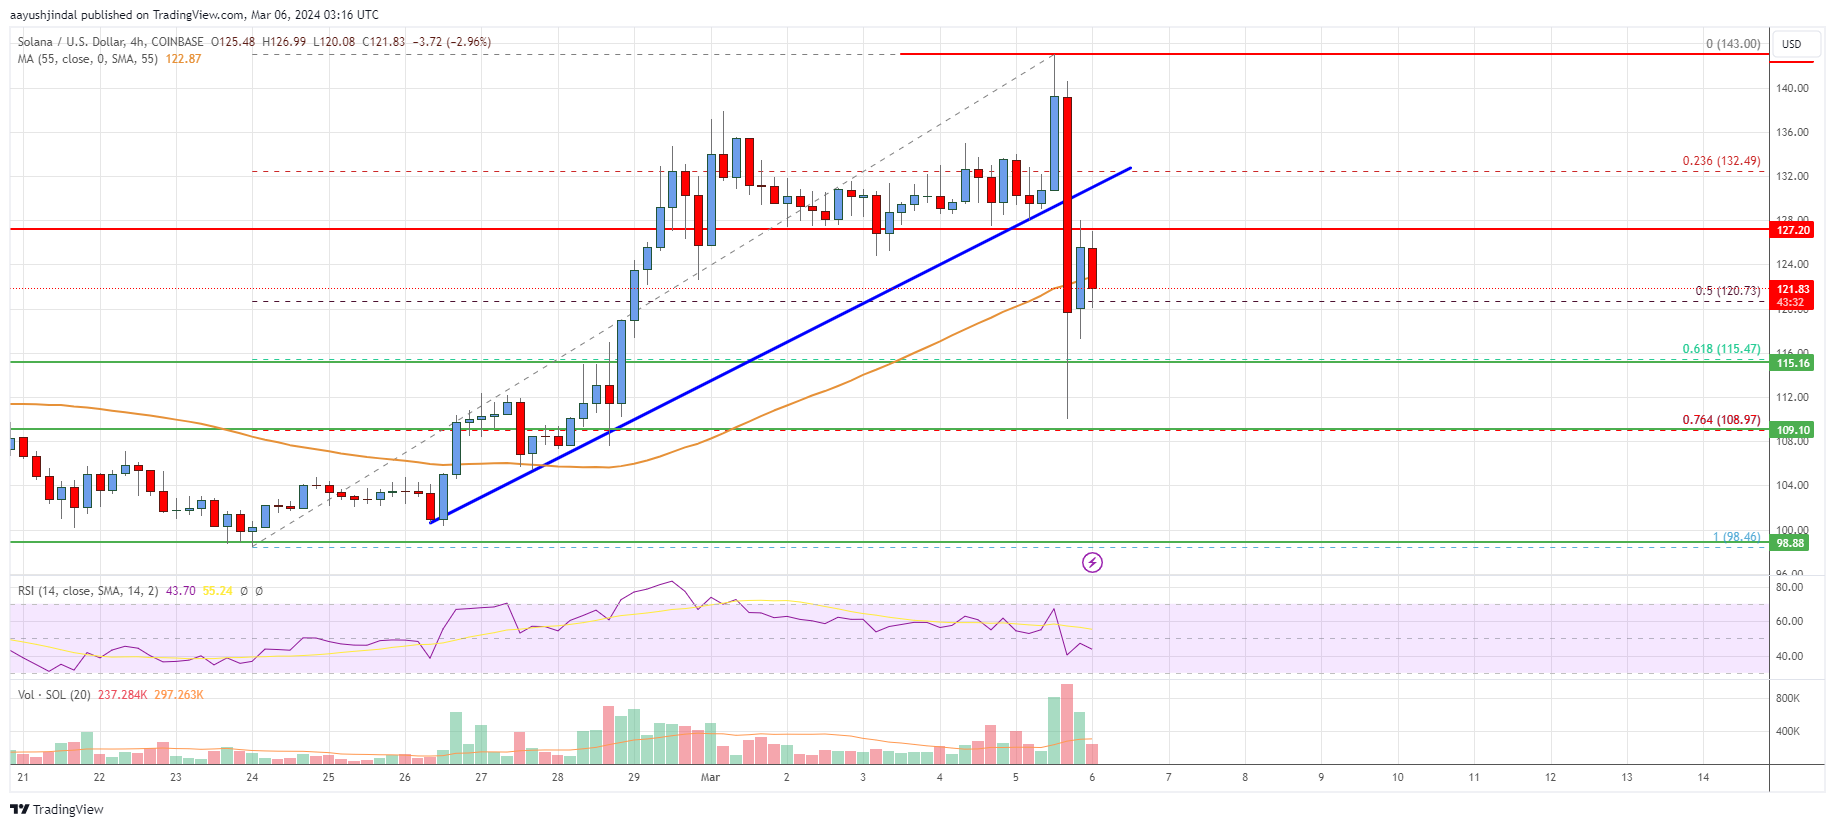 Solana (SOL) Price Analysis: Dips Are Protected Near $110